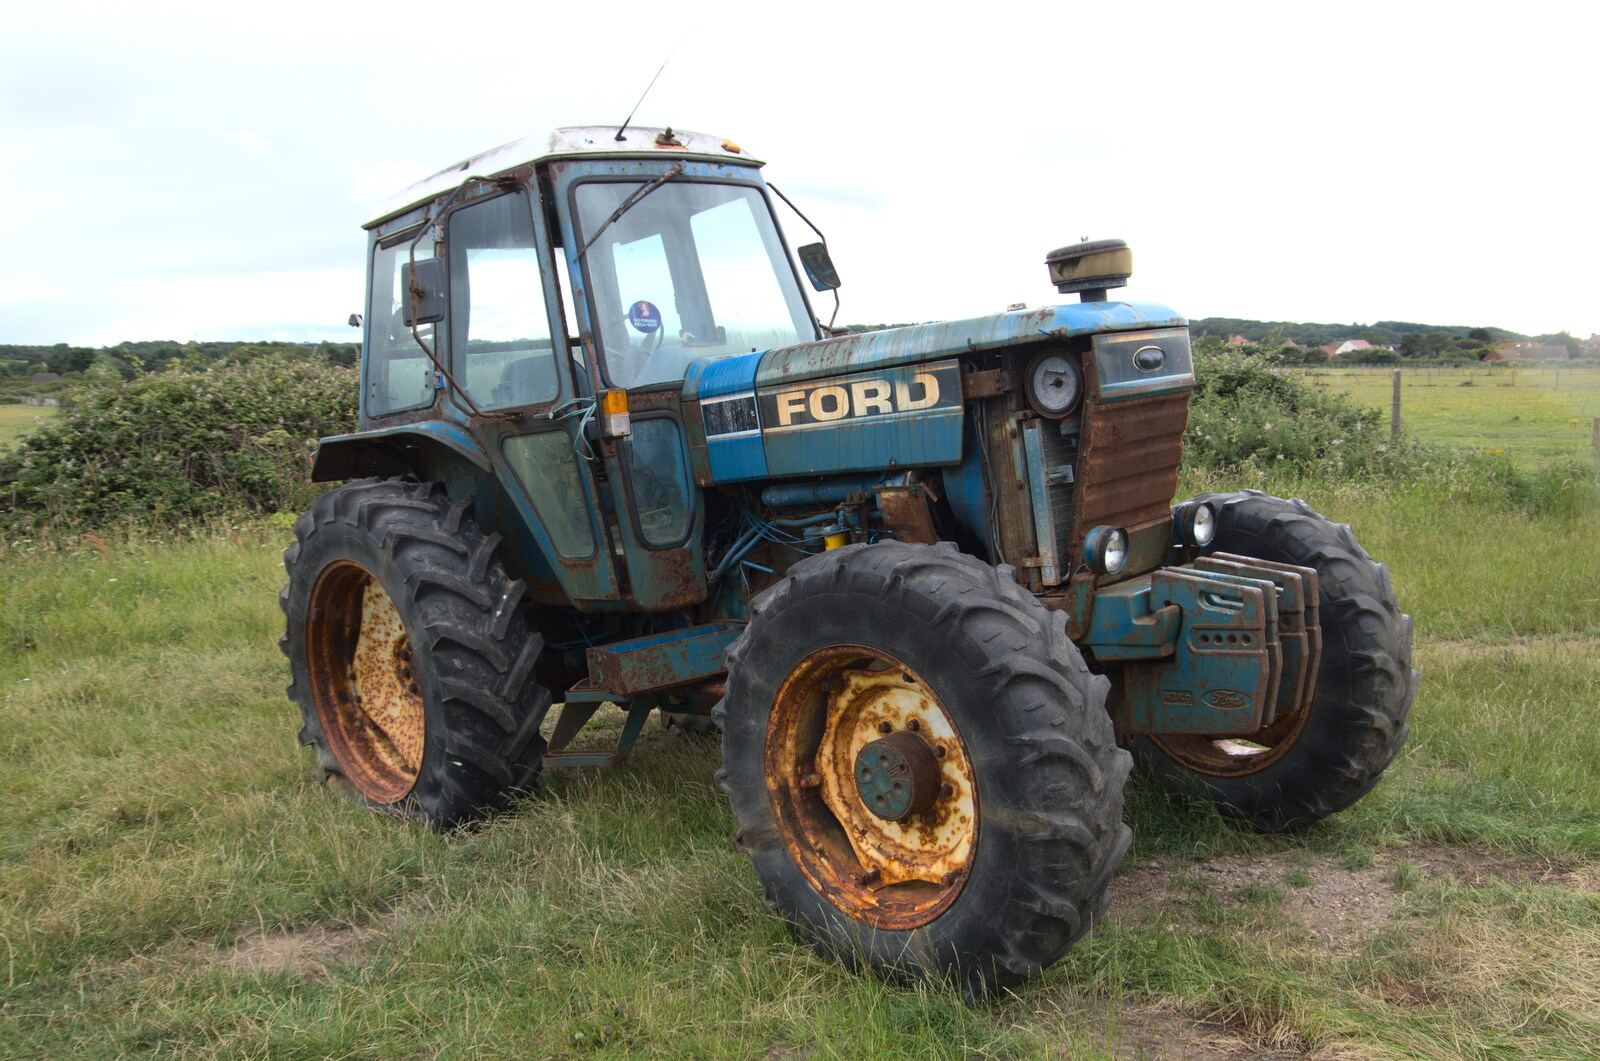 An old Ford tractor from Camping on the Coast, East Runton, North Norfolk - 25th July 2020